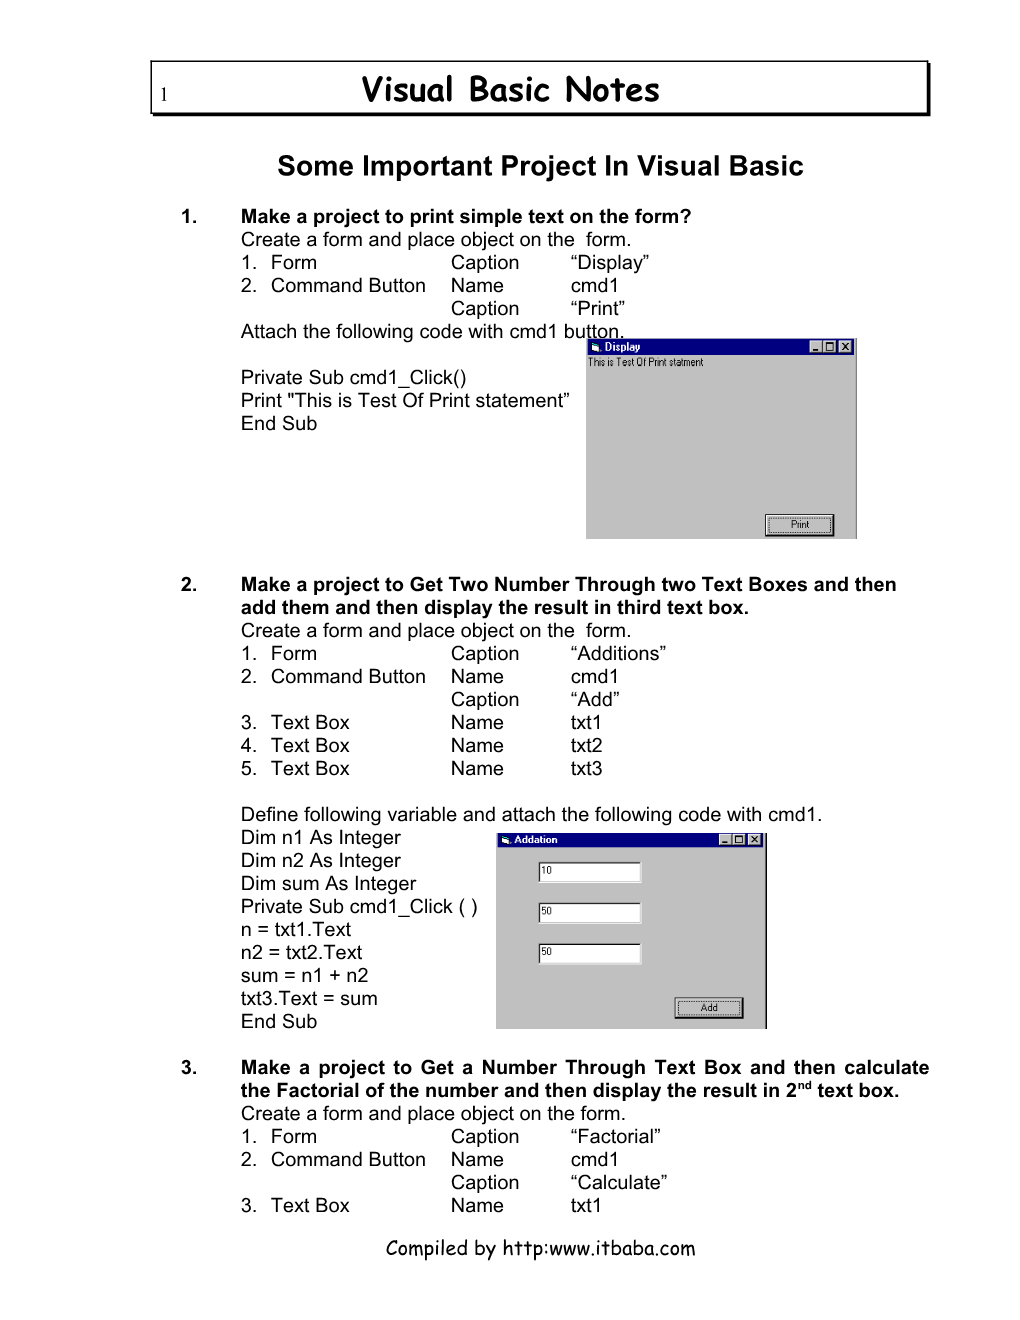 Some Important Project in Visual Basic